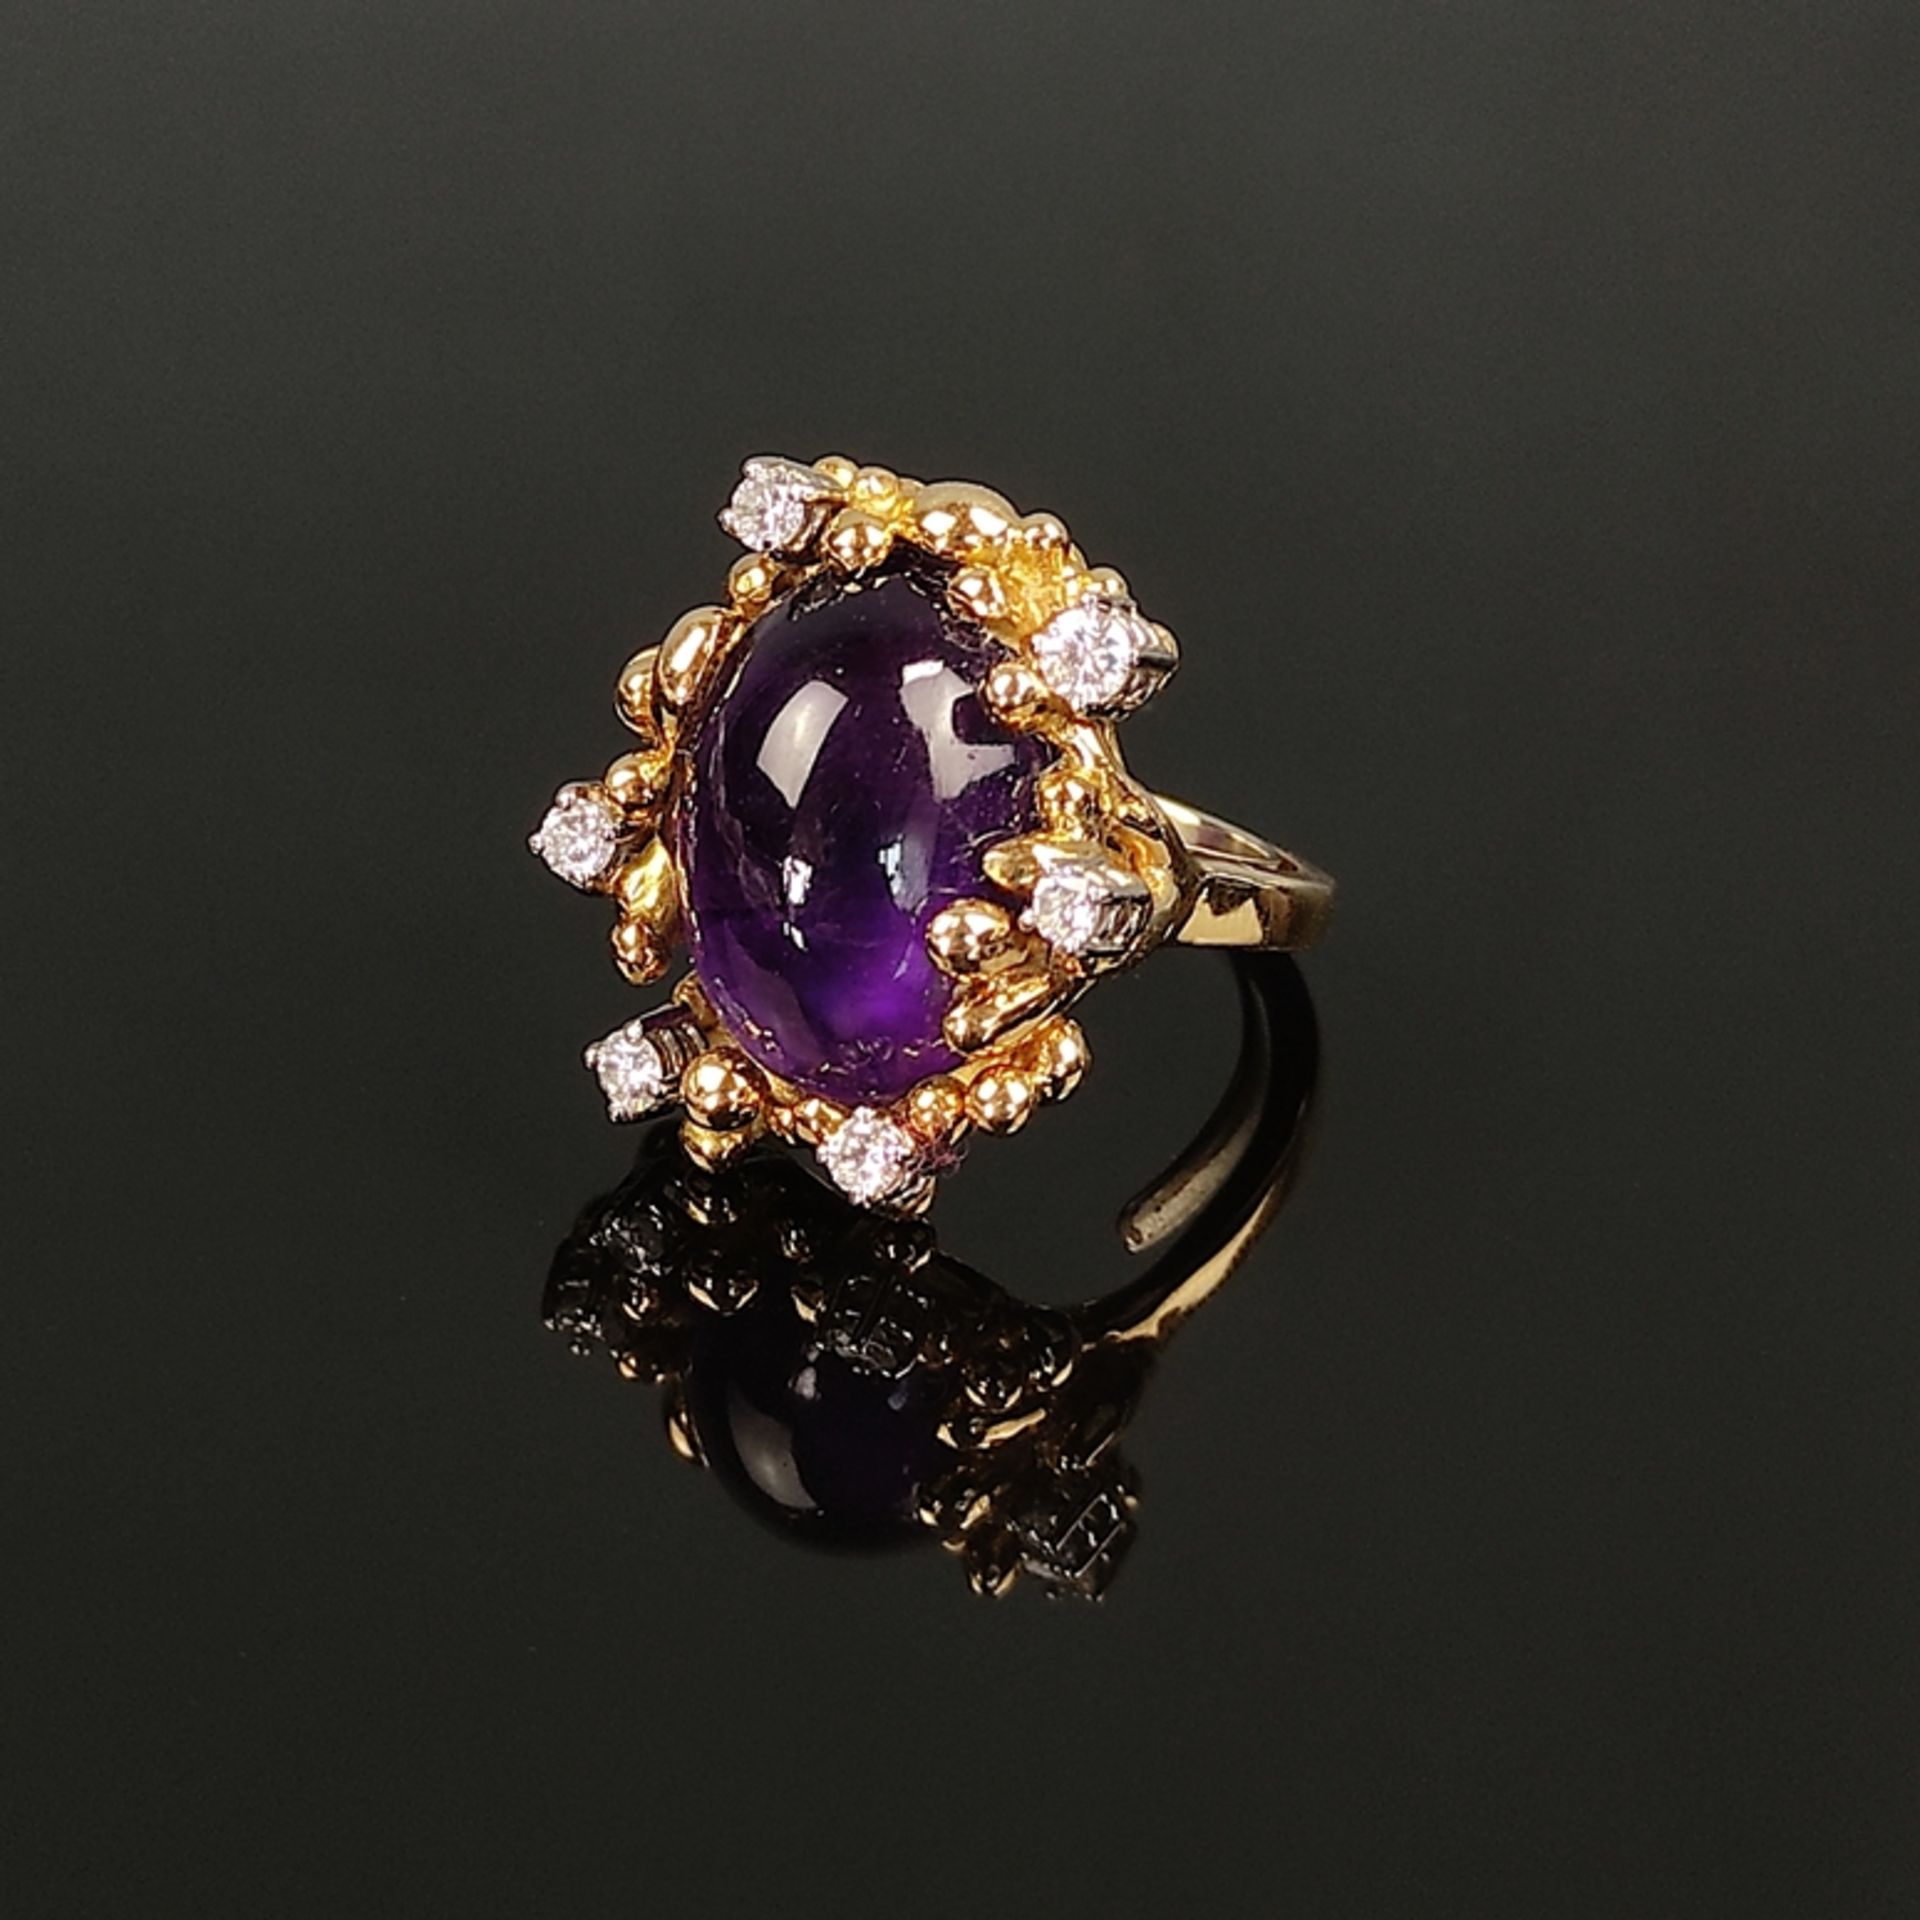 Design amethyst diamond ring, Gloor, 750/18K yellow gold, total weight 14.5g, centered large oval a